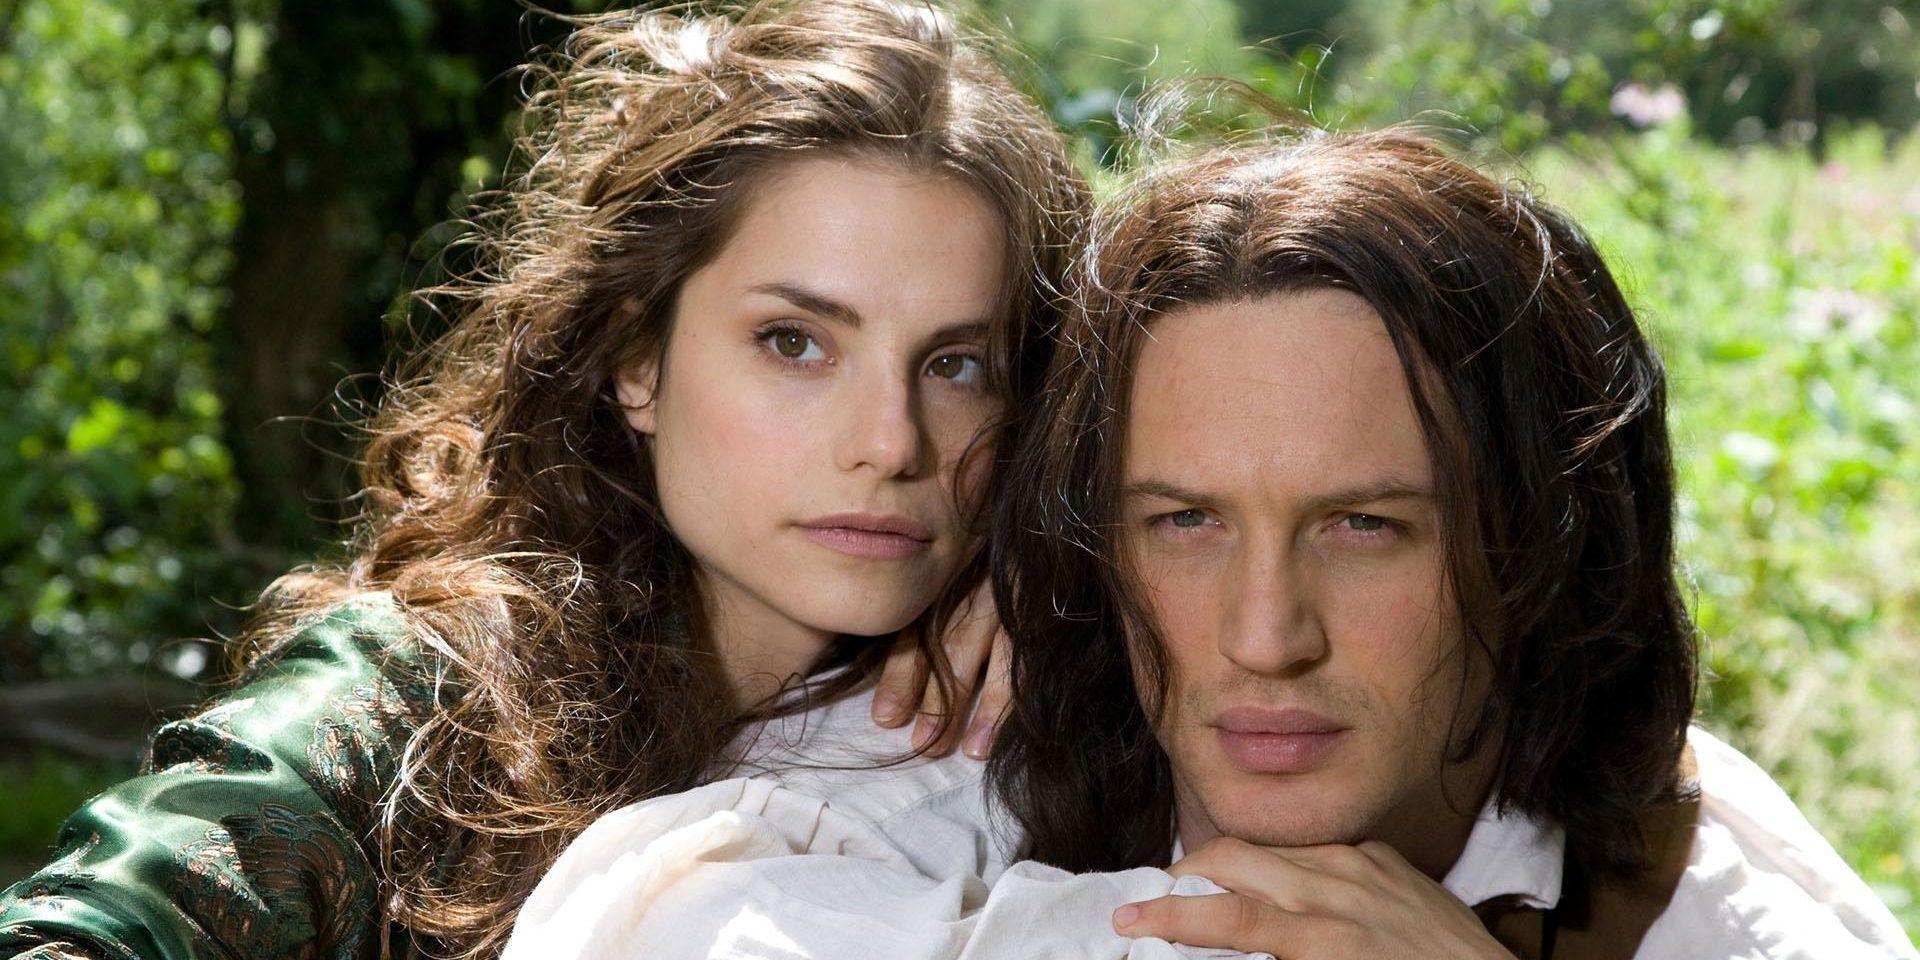 Heathcliff and Catherine in Wuthering Heights.